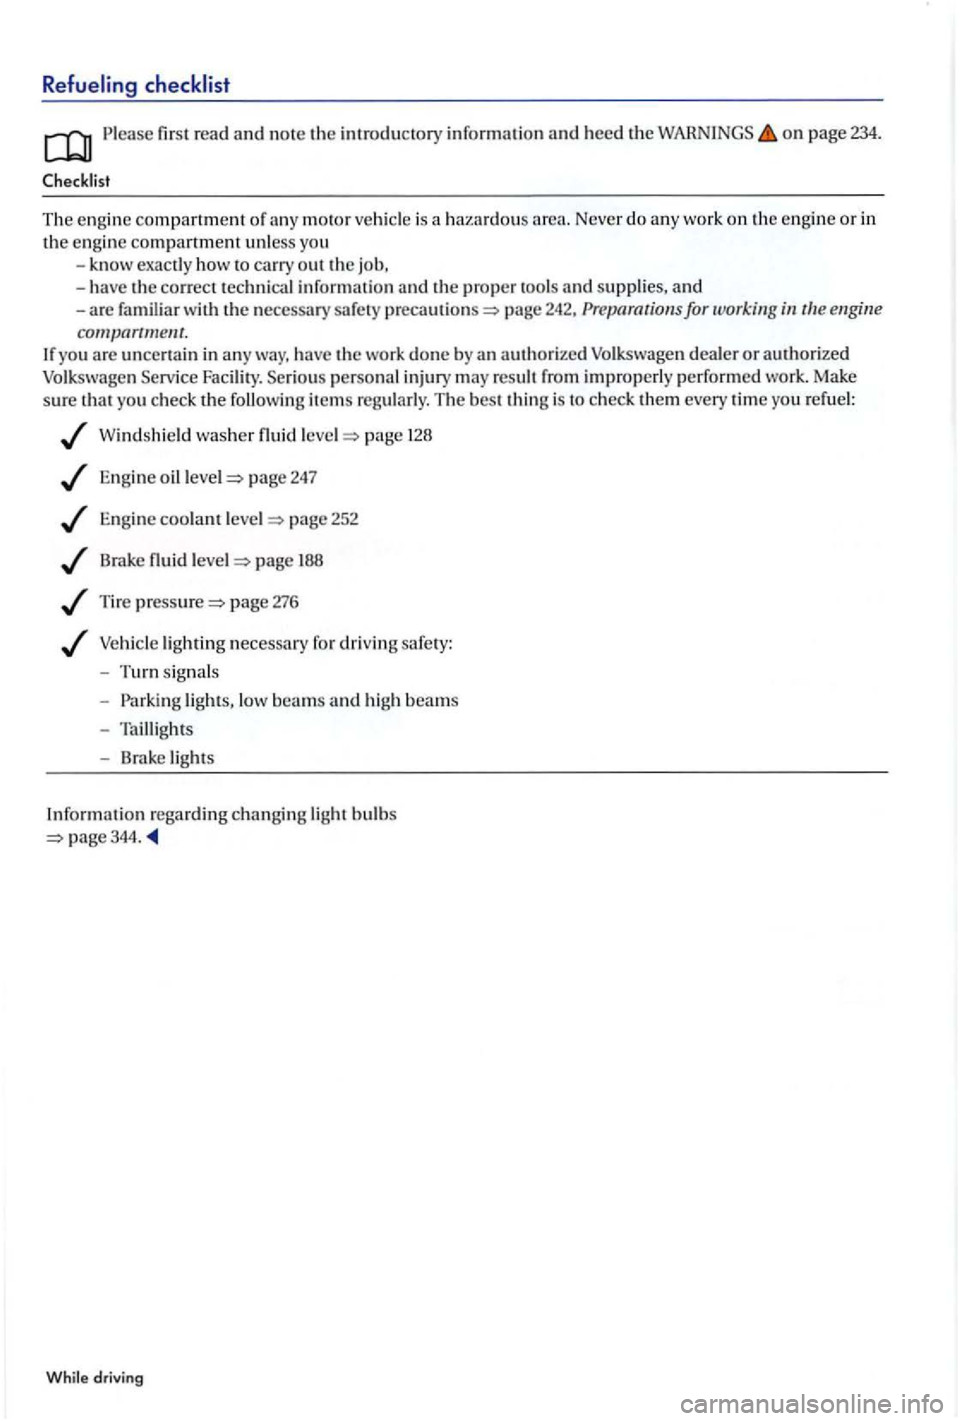 VOLKSWAGEN GOLF PLUS 2006  Owners Manual Refueling checklist 
first  rea d an d note the introductory information and heed the on page  234. 
The  engi ne compartment of moto r vehicle  is  a  haza rdous engine or in the engin e compartment 